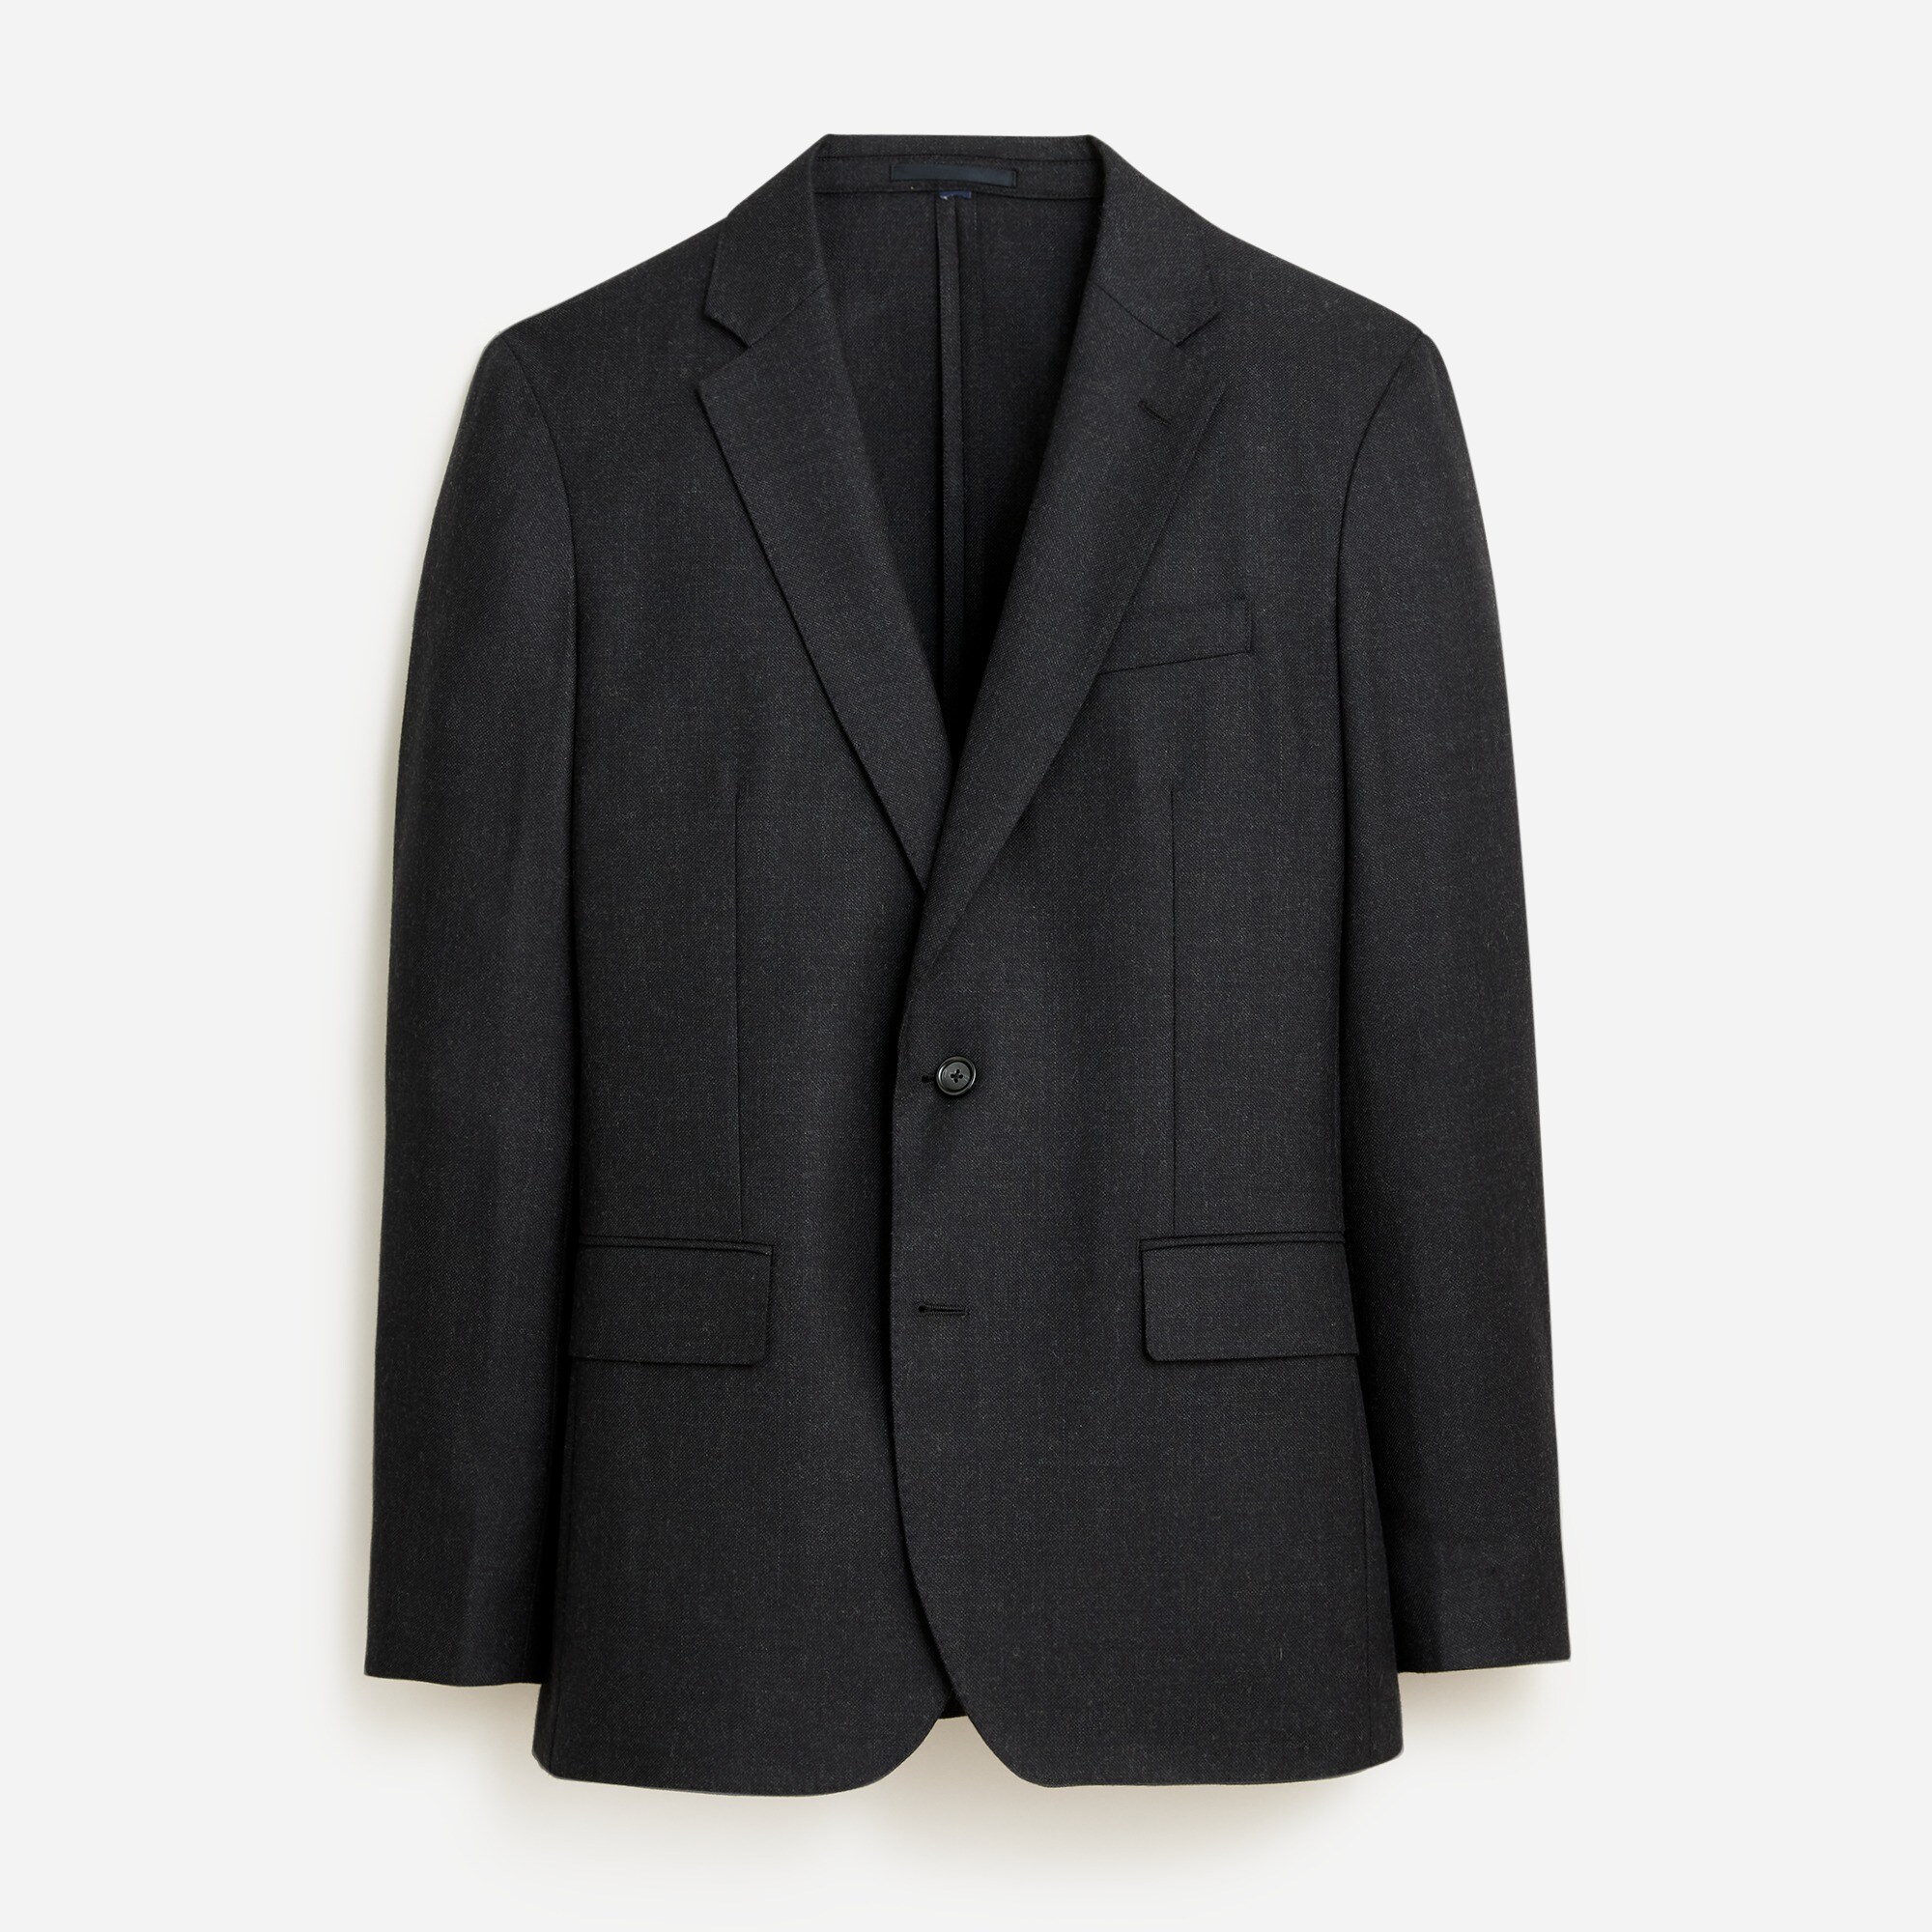  Ludlow Slim-fit suit jacket in English cotton-wool blend